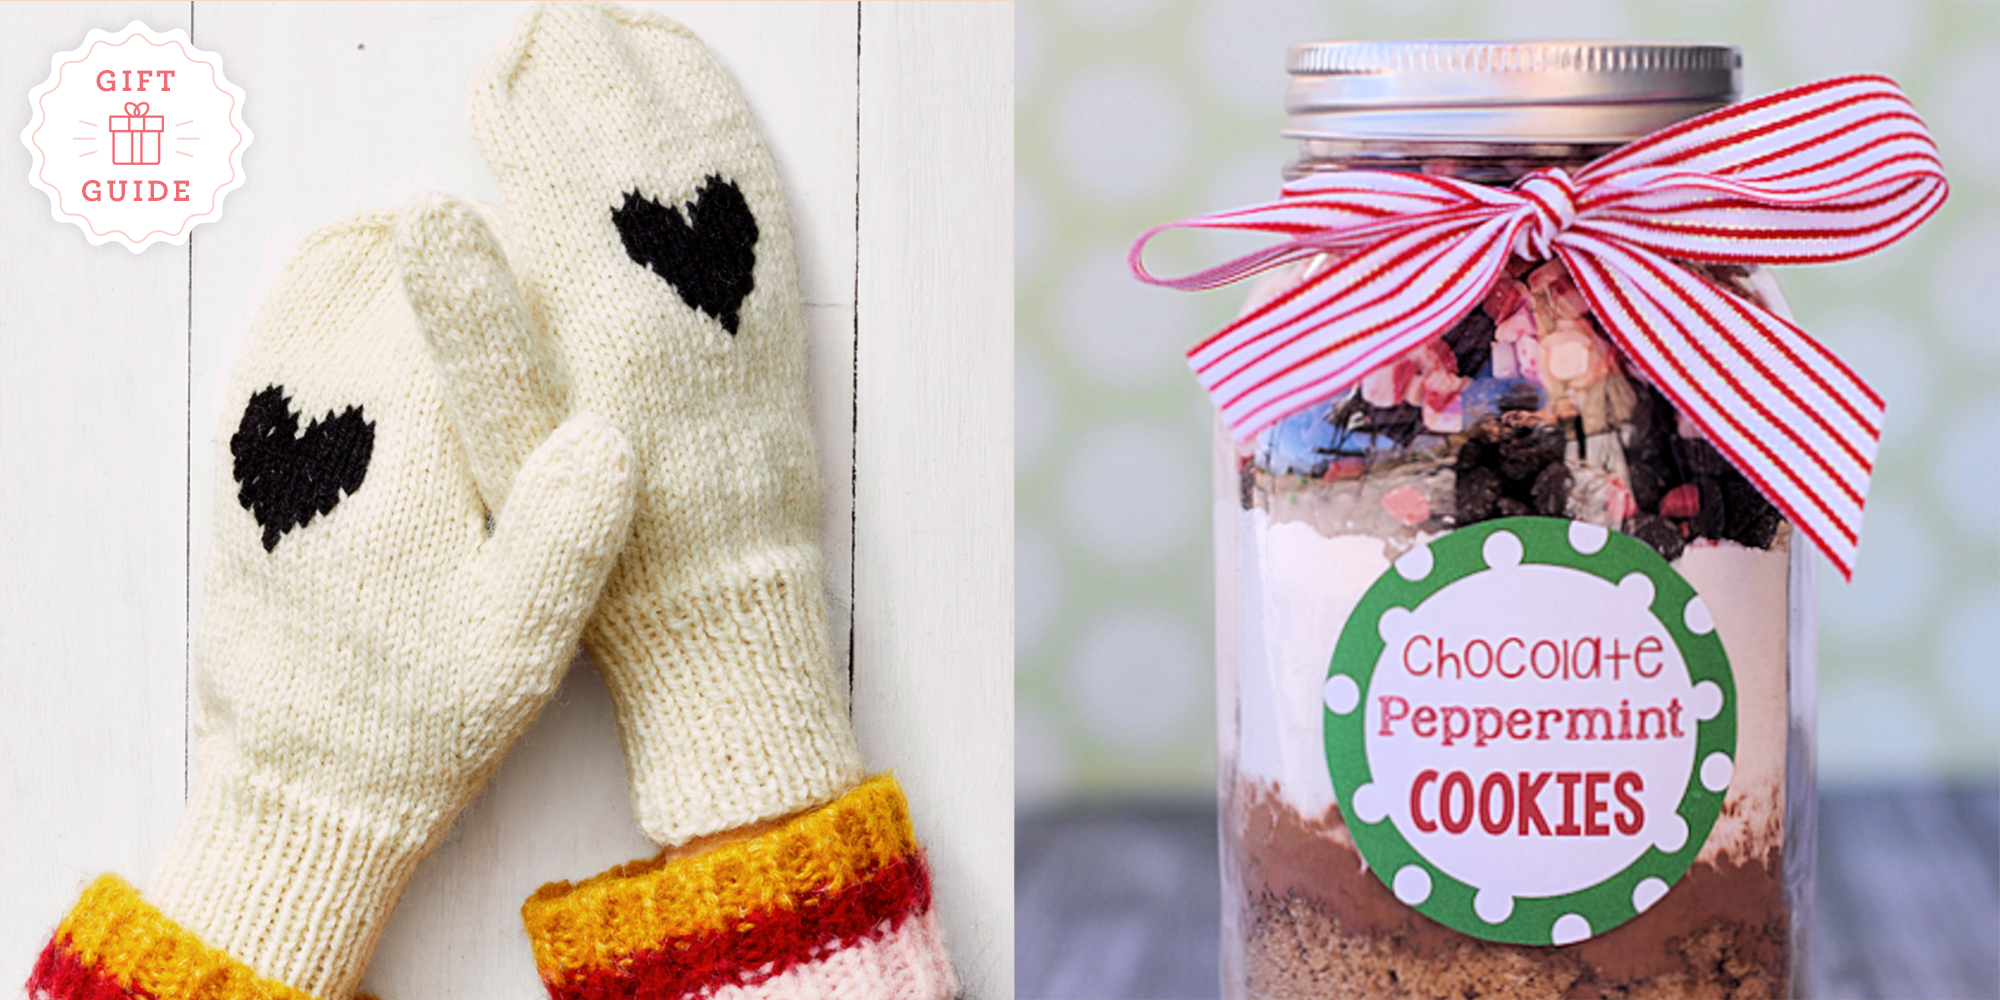 17 Amazing Handmade Christmas Gift Ideas Your Friends and Family Will Love  - Back Road Bloom